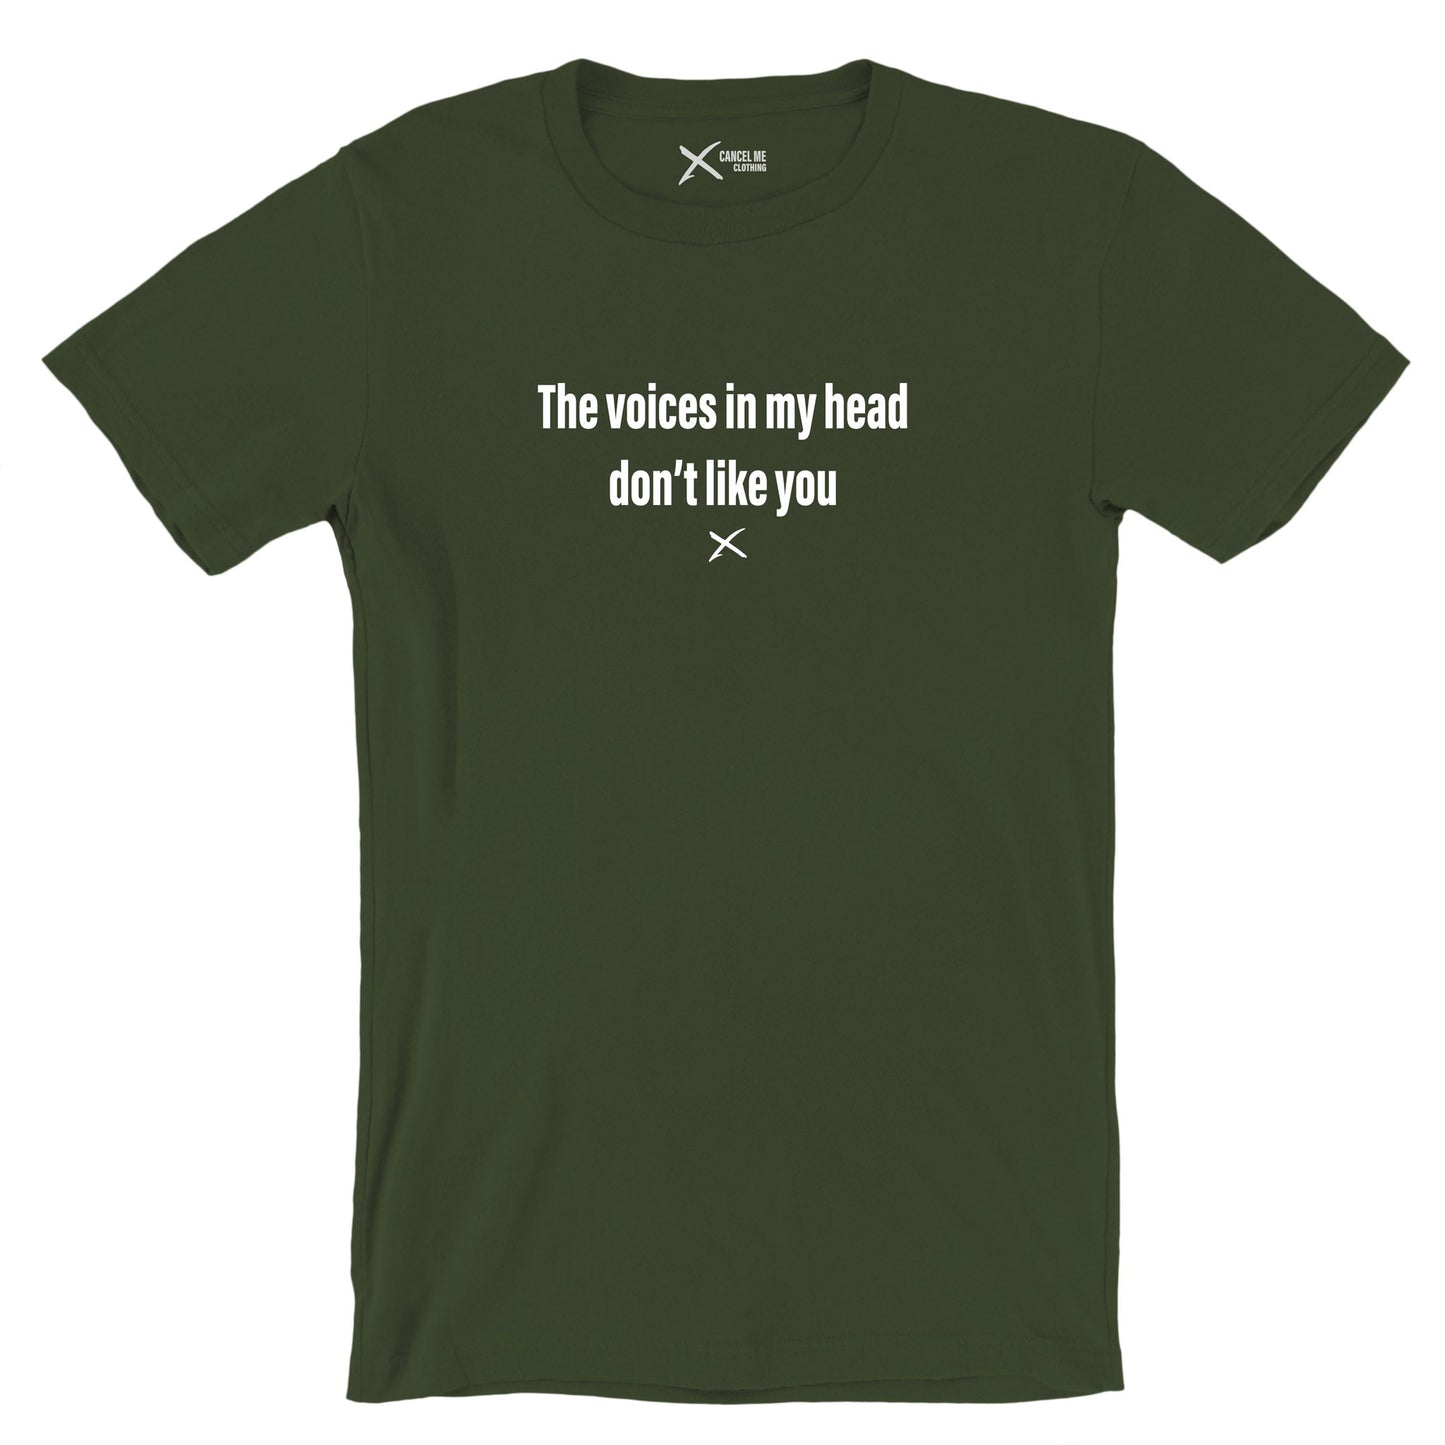 The voices in my head don't like you - Shirt